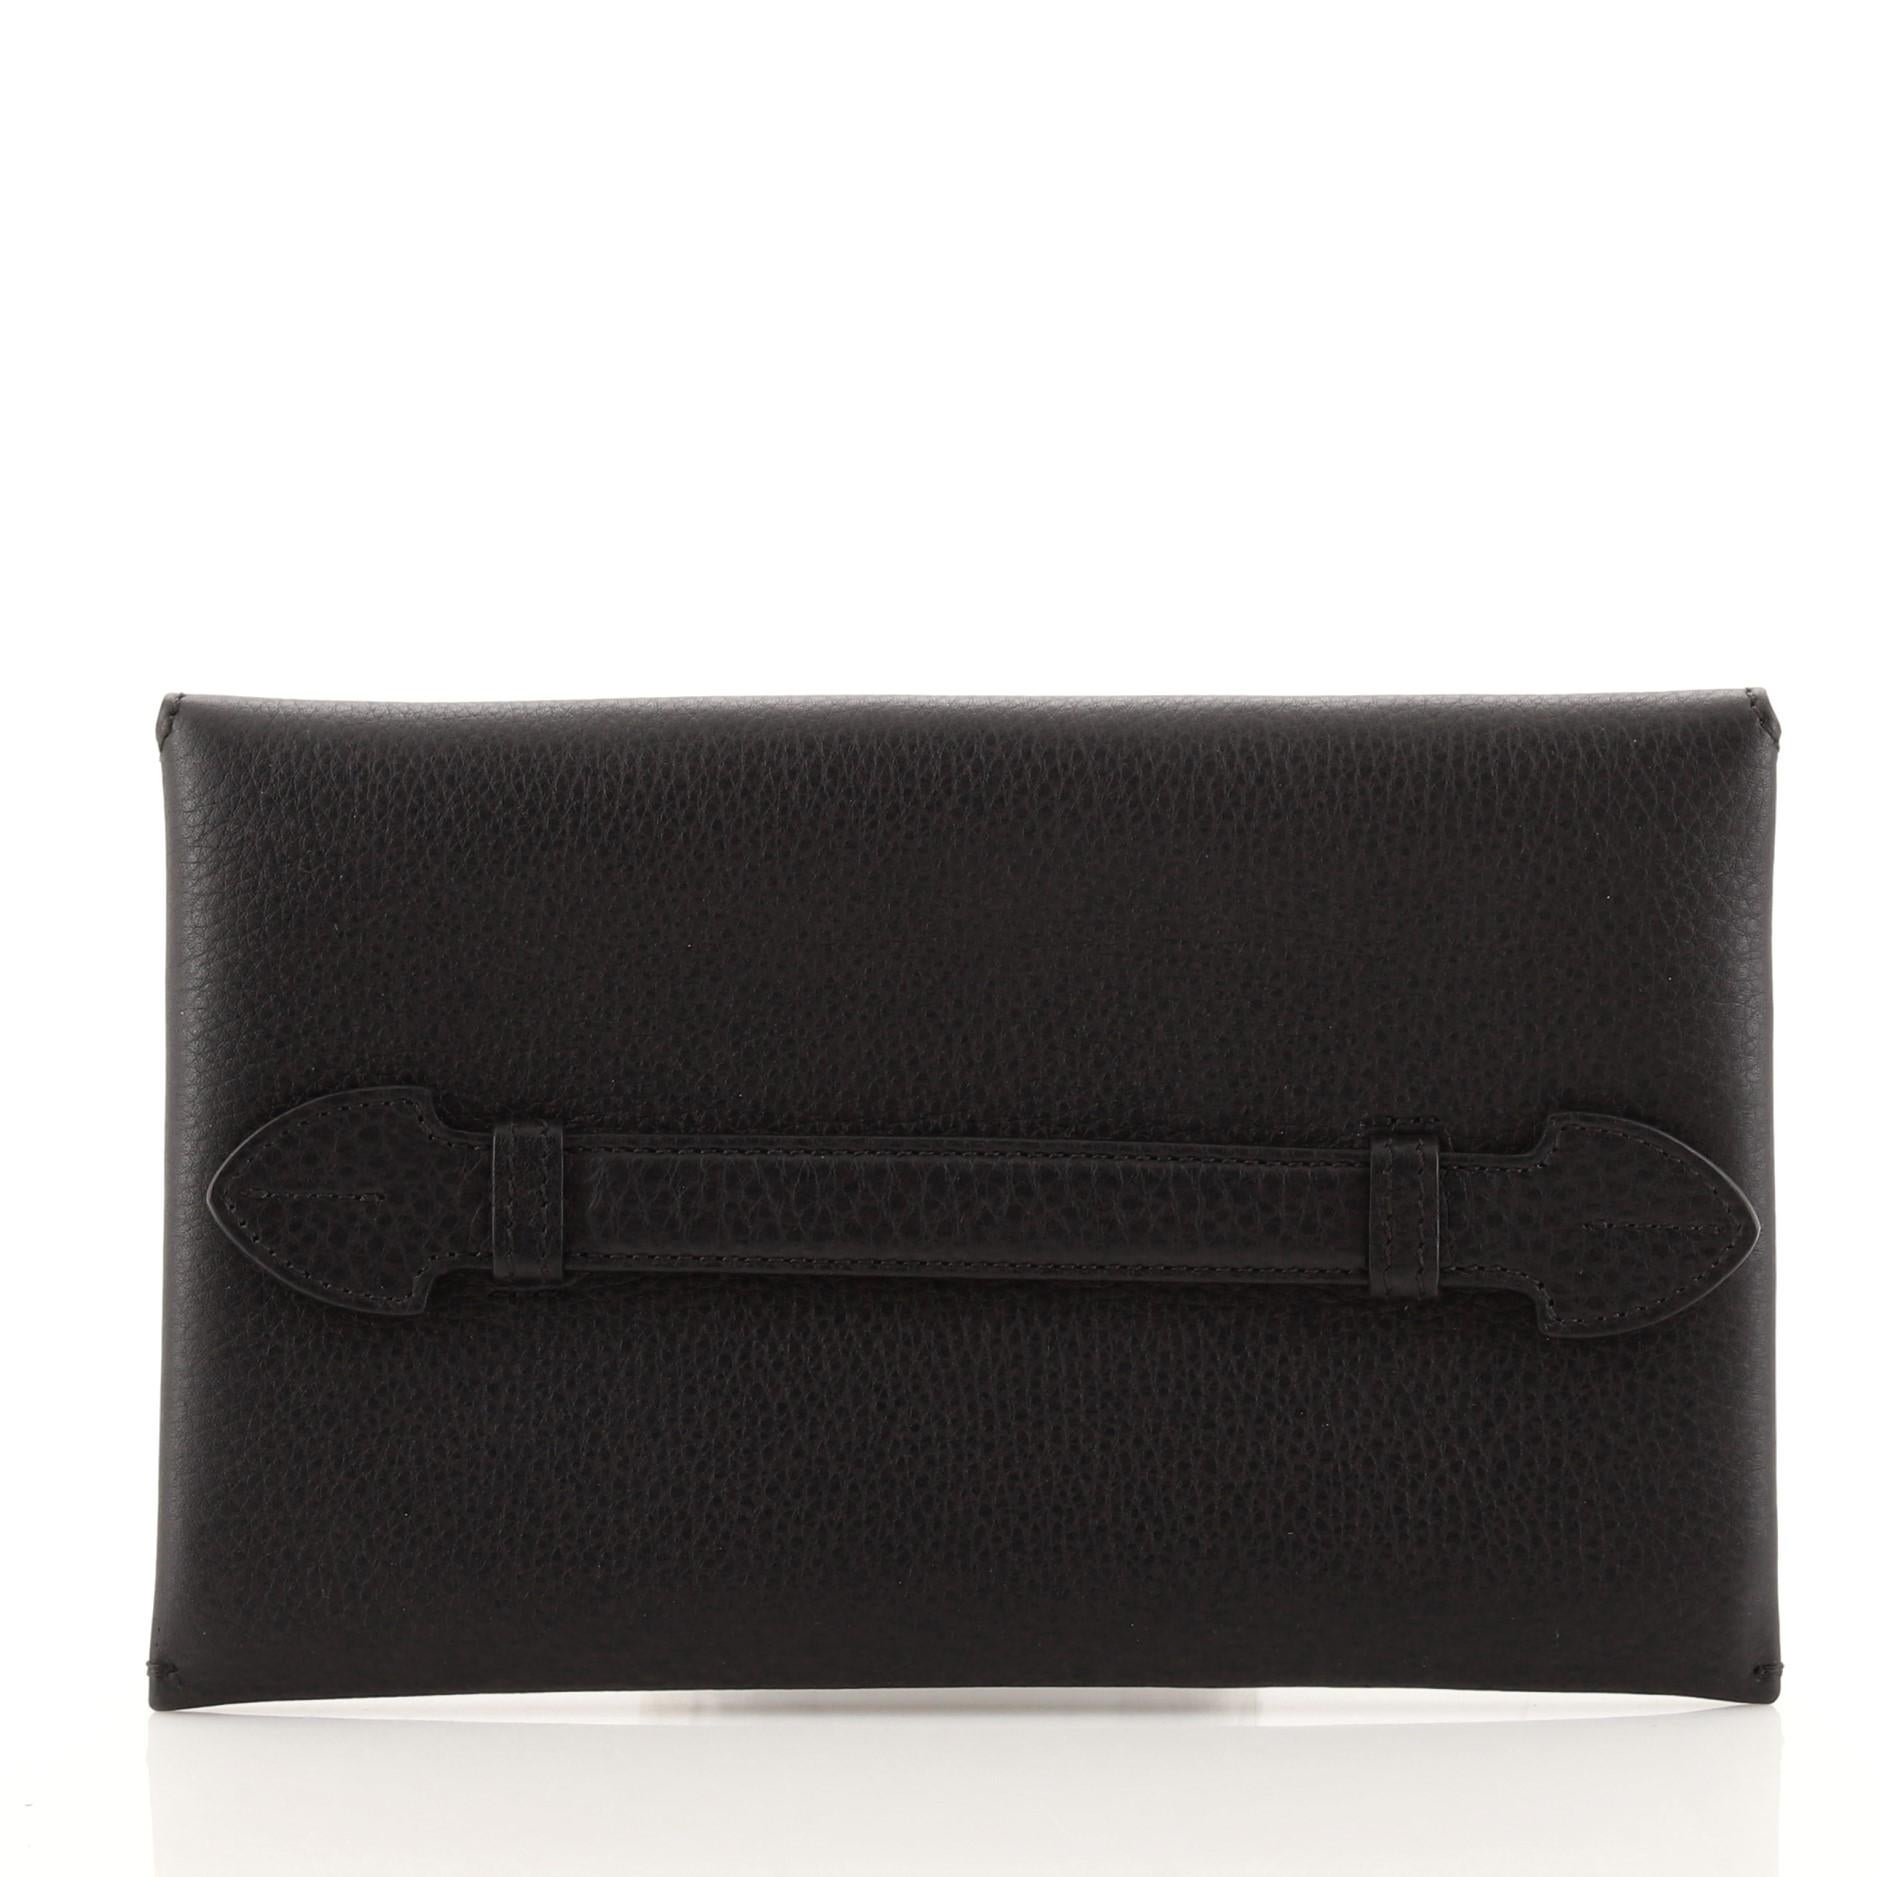 Black Burberry Pearson Clutch Leather